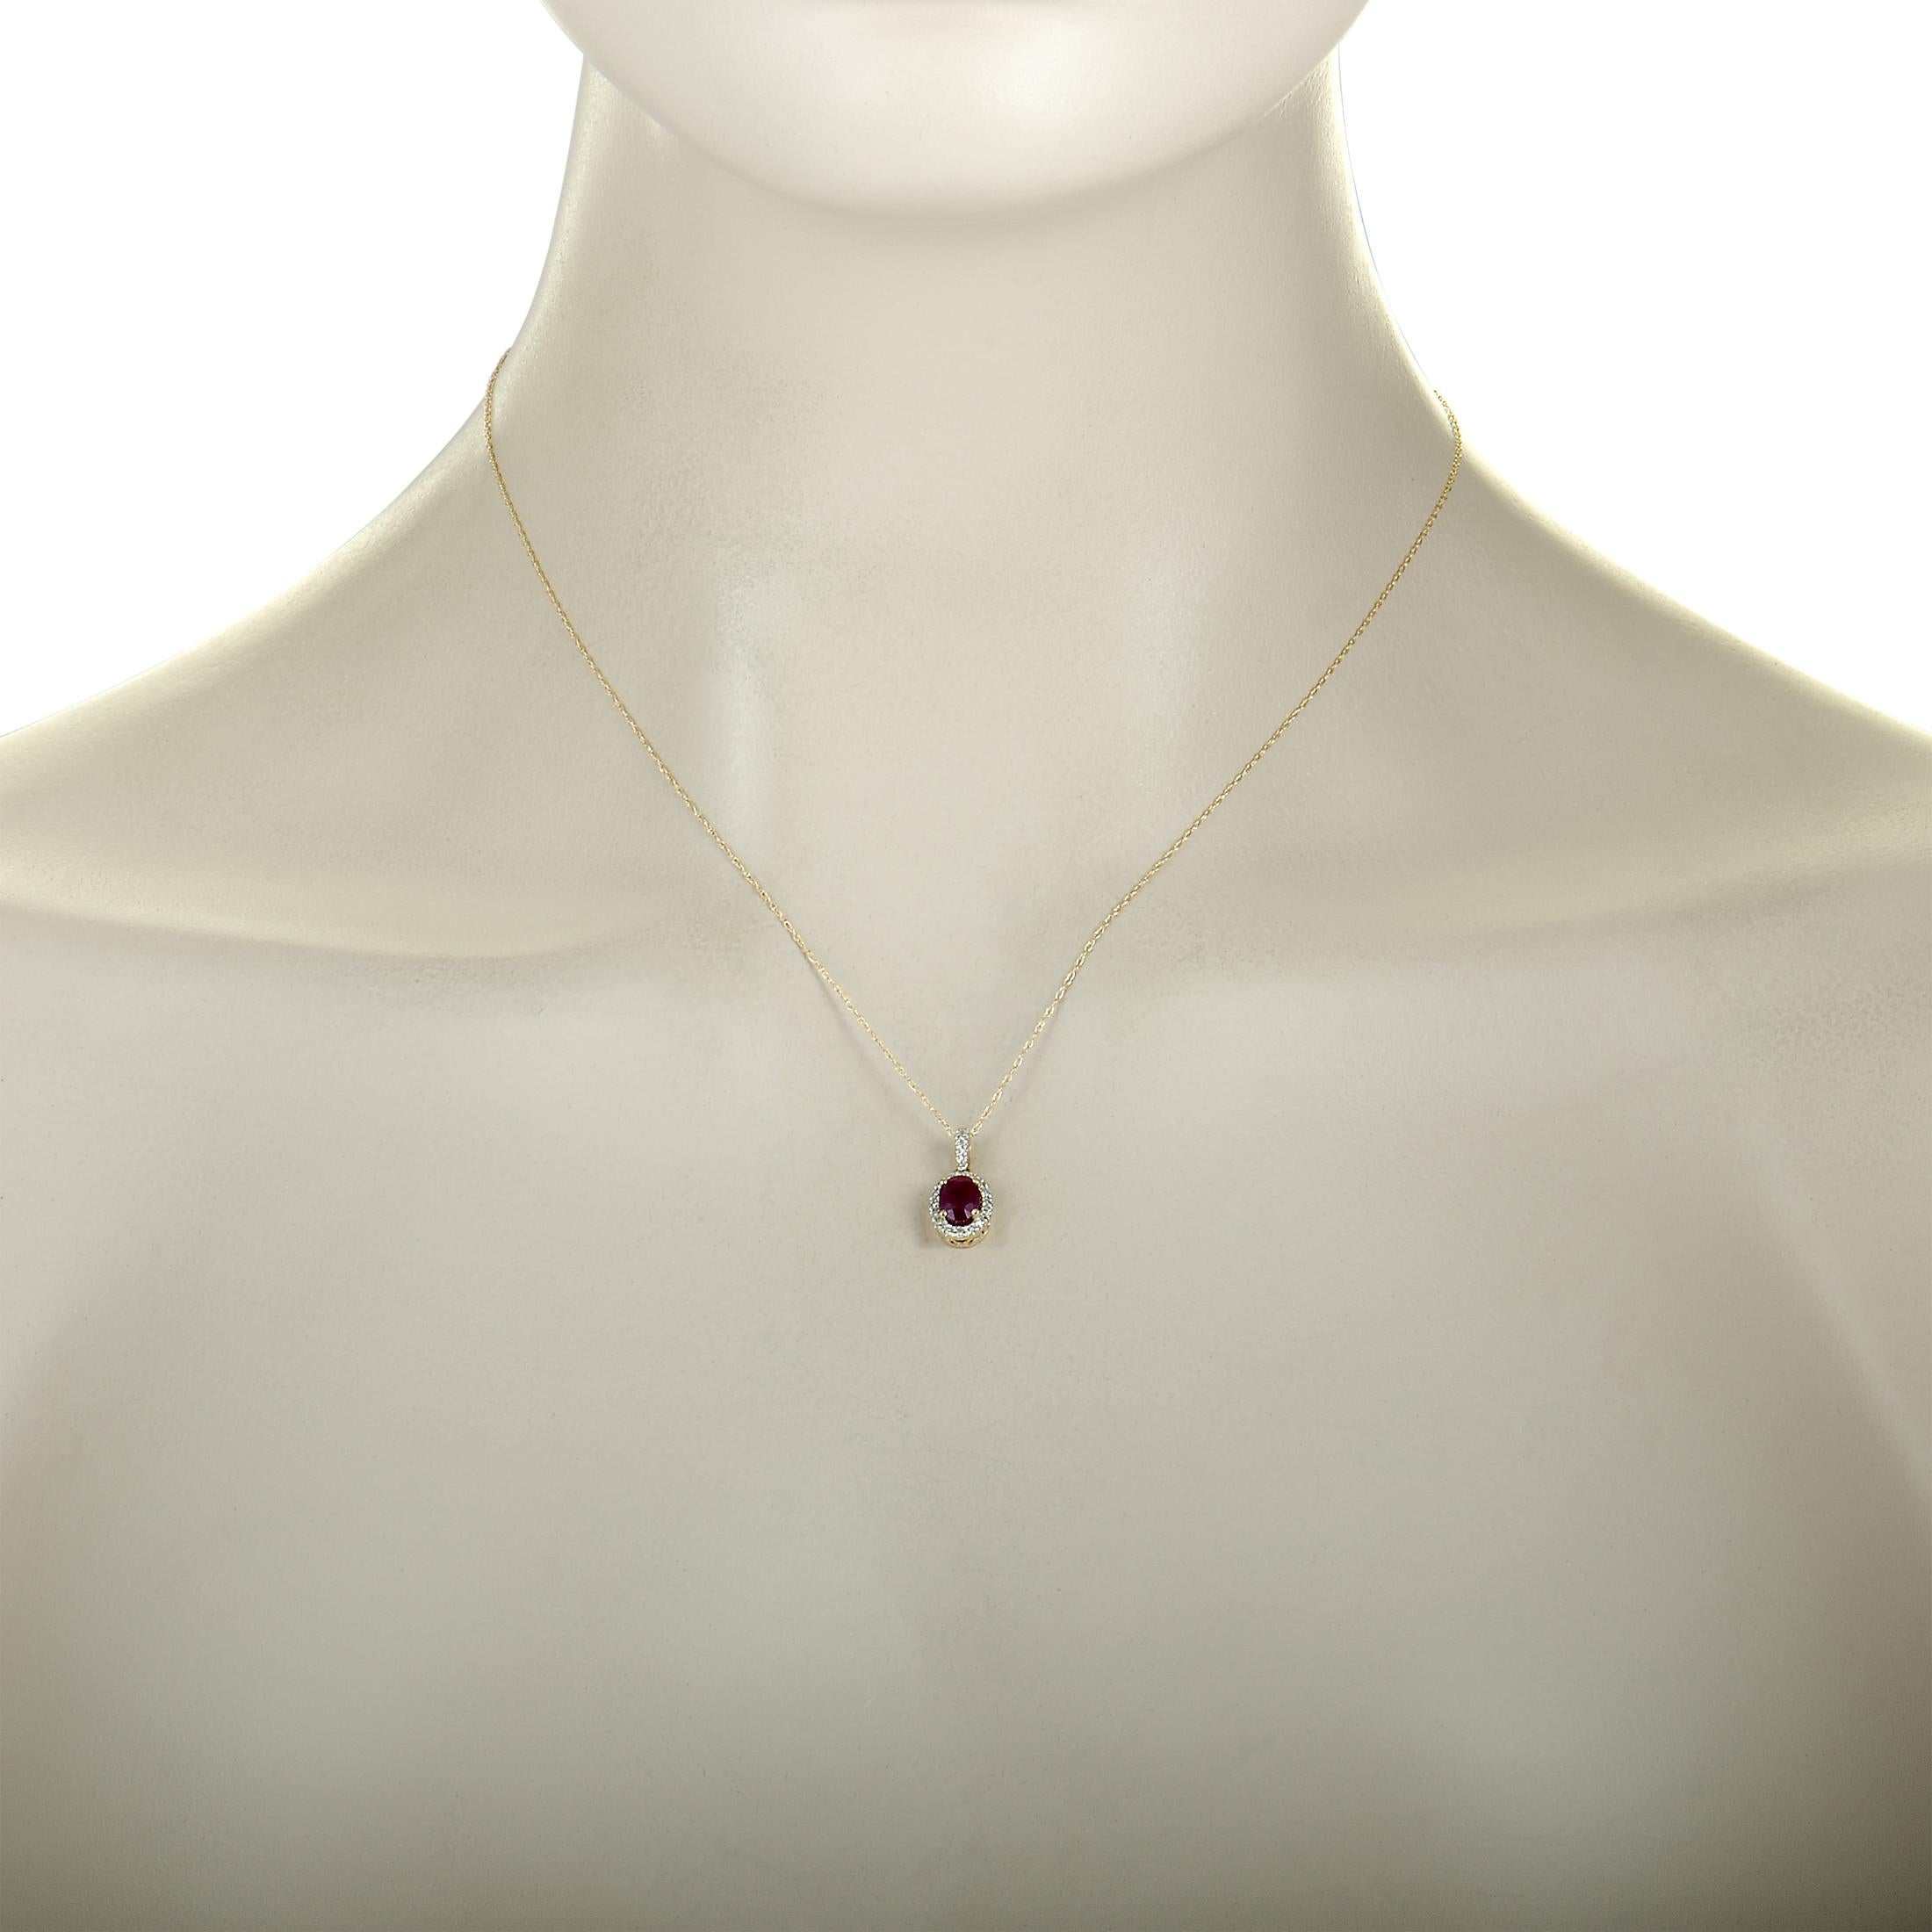 This necklace is made of 14K yellow gold and set with a ruby and a total of 0.12 carats of diamonds. It has an 18.00” long chain with spring ring closure, while the pendant measures 0.62” in length and 0.30” in width. The necklace weighs 1.7 grams.
